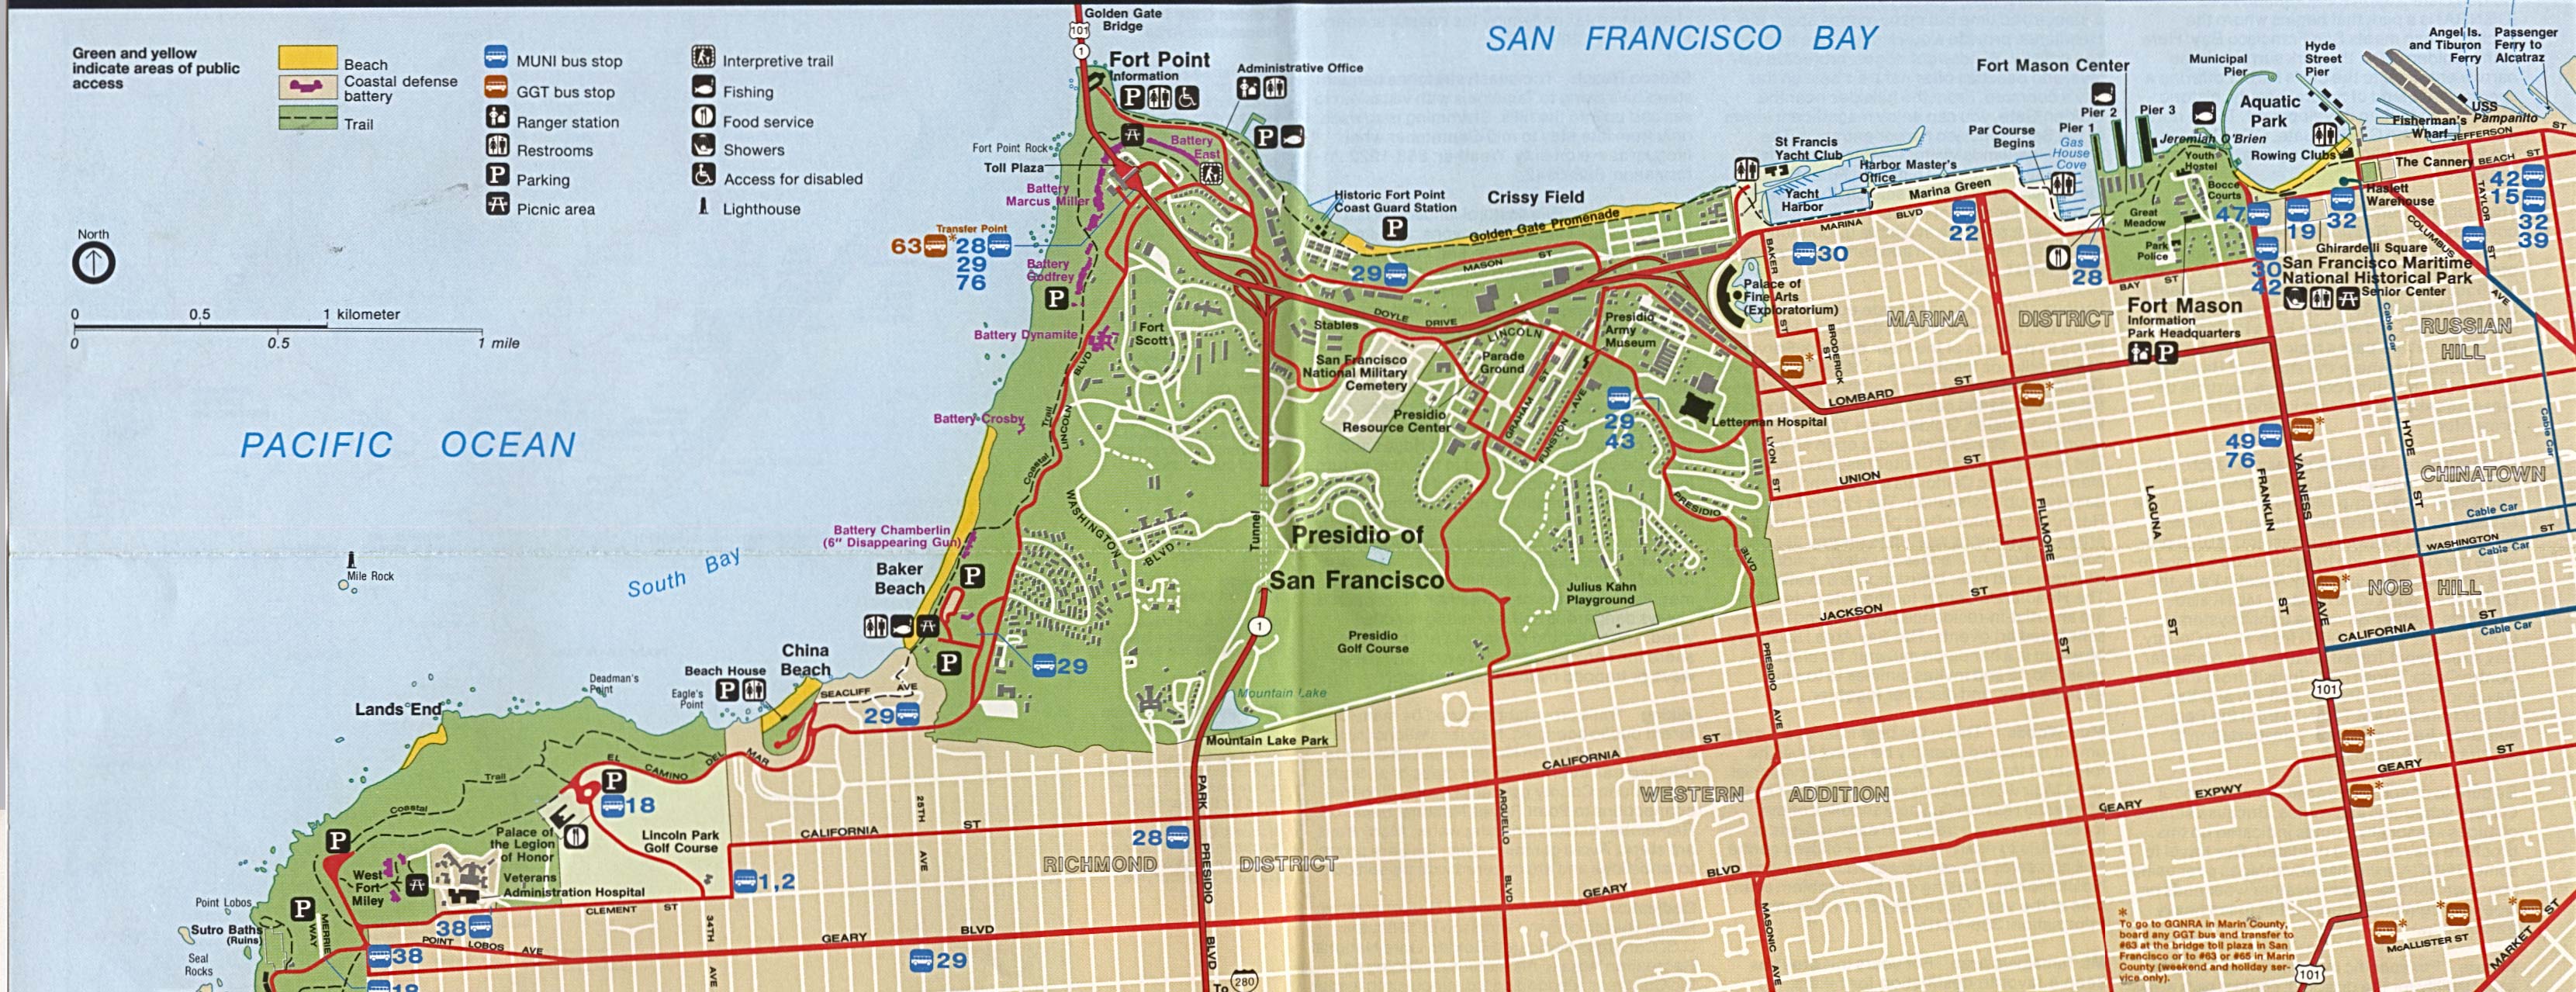  Maps of United States National Parks, Monuments and Historic Sites Golden Gate National Recreation Area - Northern [California] (Park Map) 1995 (705K) 